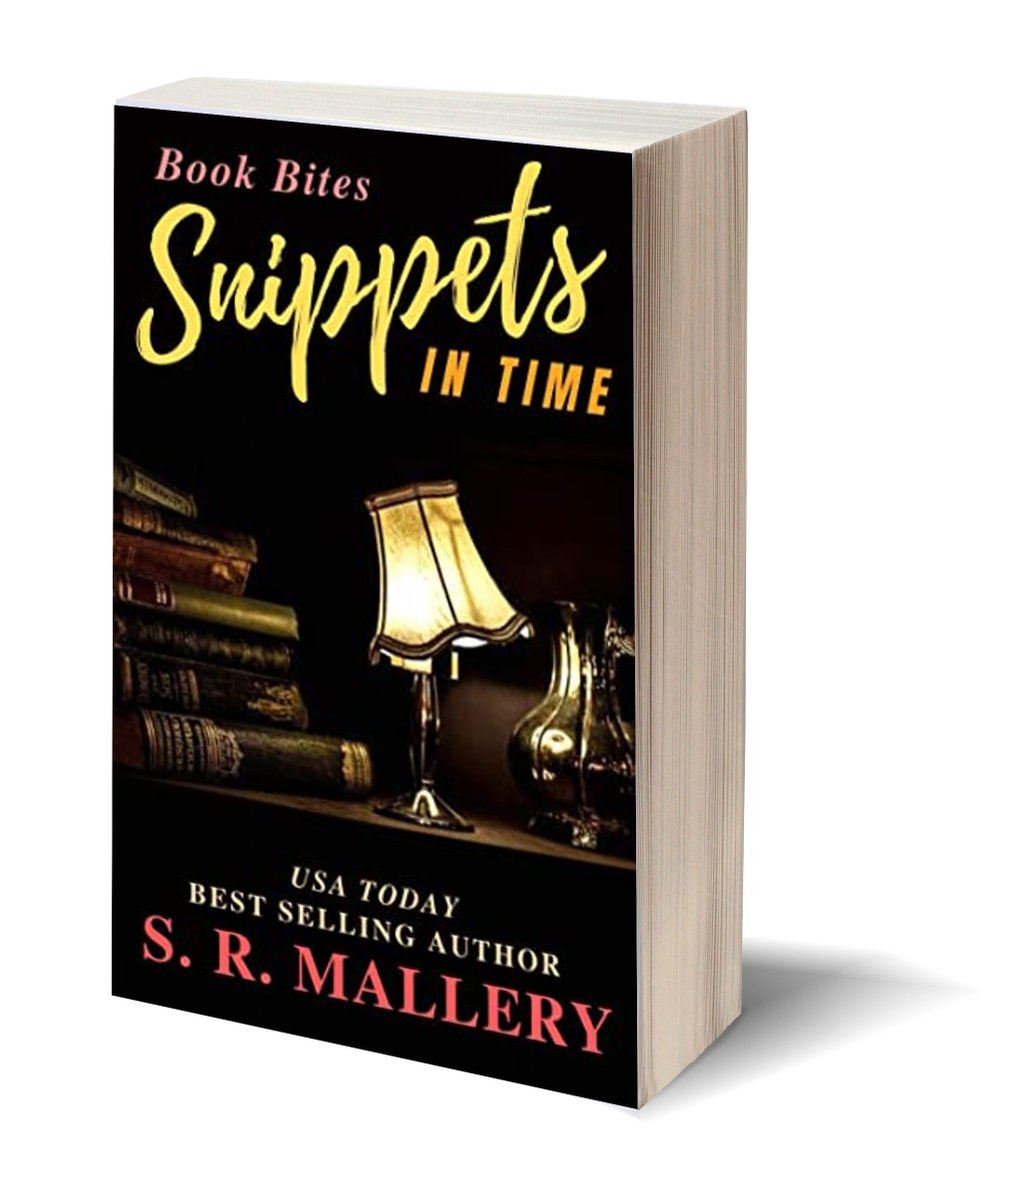 Drift back in time with award-winning author S. R. Mallery
SNIPPETS IN TIME
amzn.to/2WElf0D
wp.me/P5rIsN-3IY
@SarahMallery1
#IARTG #ASMSG #mustreads
Pizzazz Promotions wp.me/P5rIsN-Ft 
   1